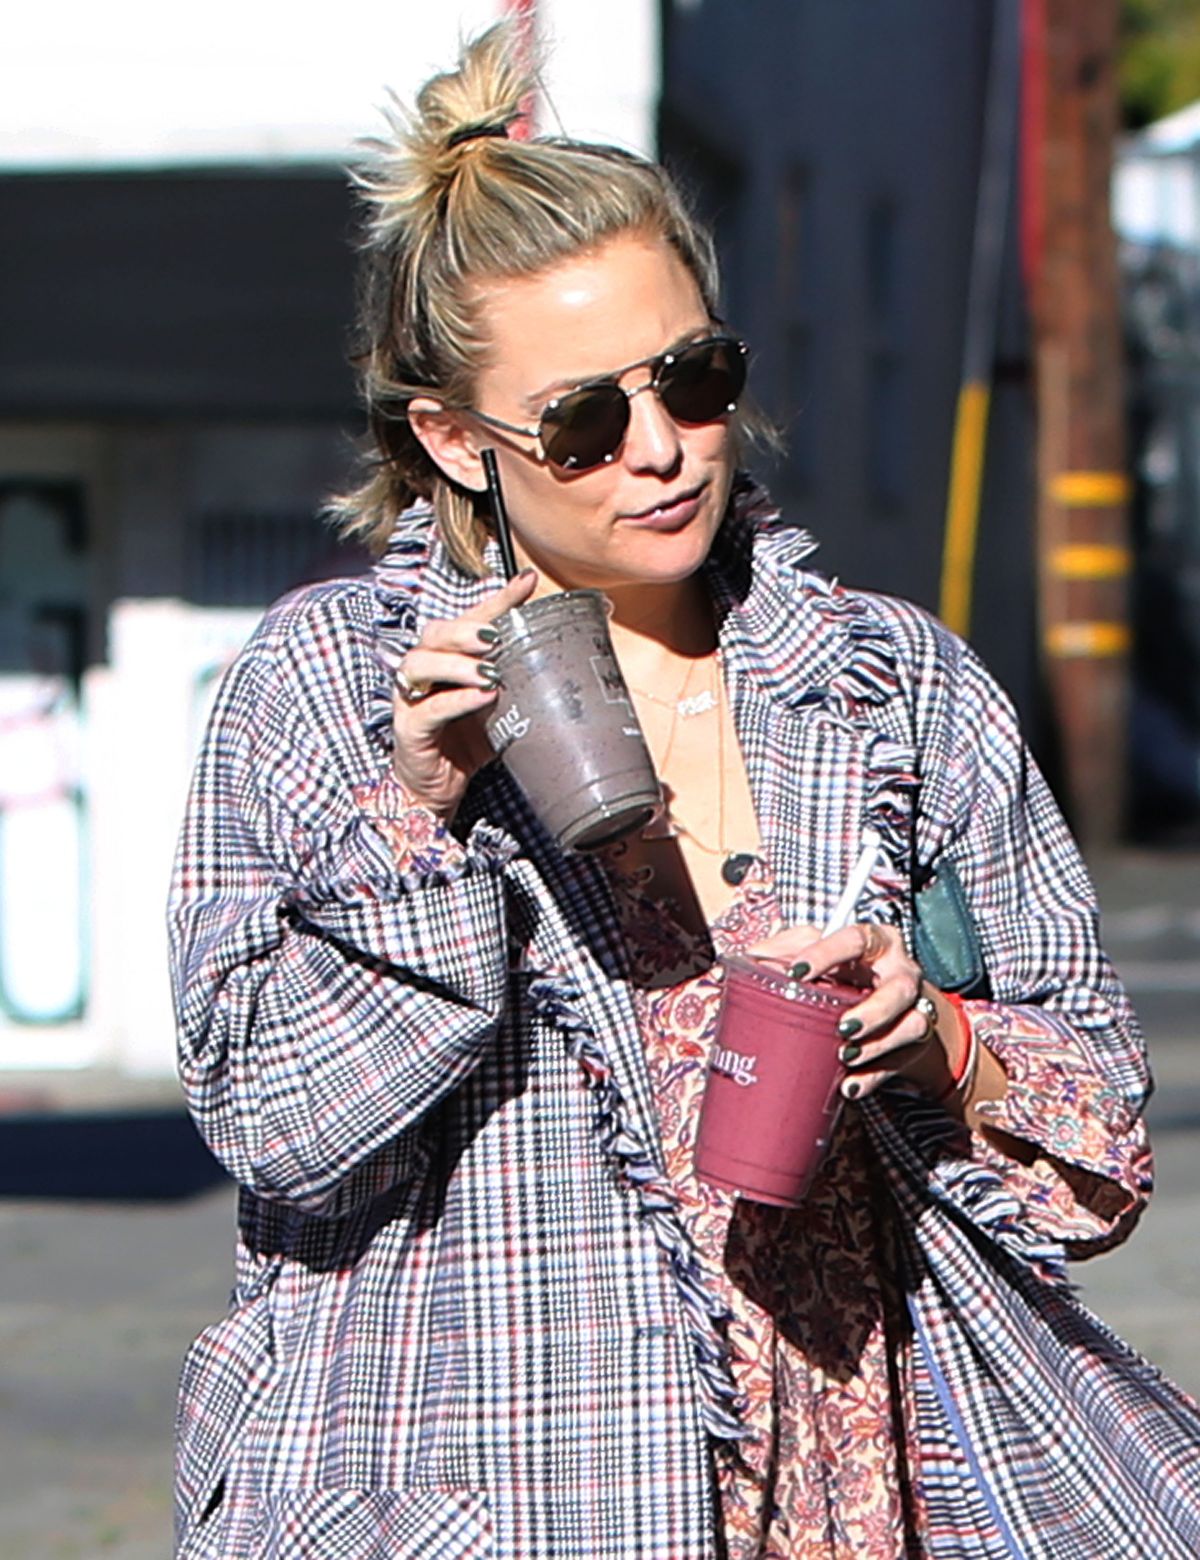 KATE HUDSON Out and About in Los Angeles 01/22/2019 – HawtCelebs